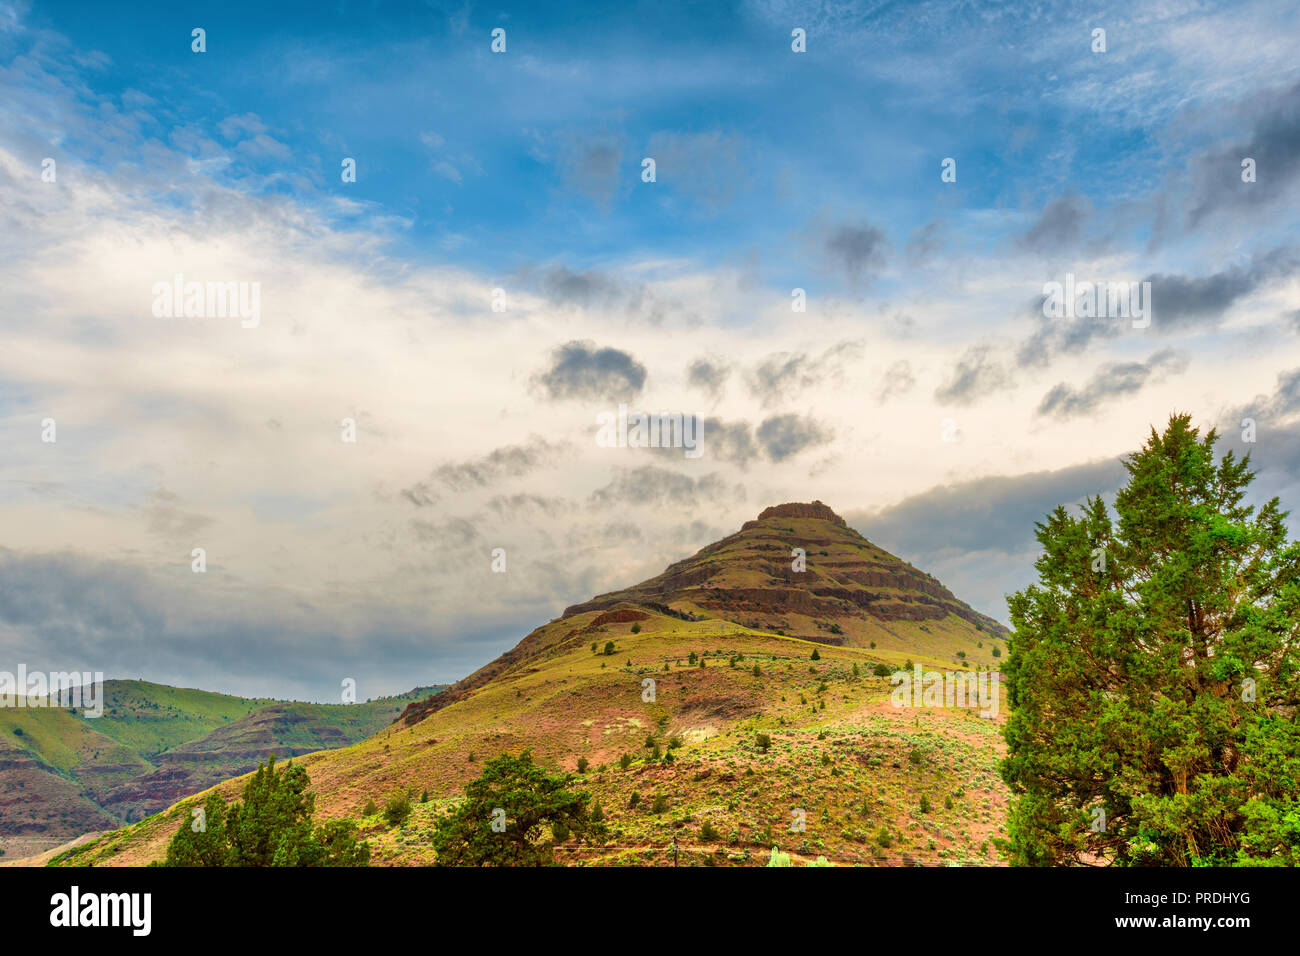 Geological landscape view under partly cloudy skies in the John Day Fossil Beds National Park Stock Photo